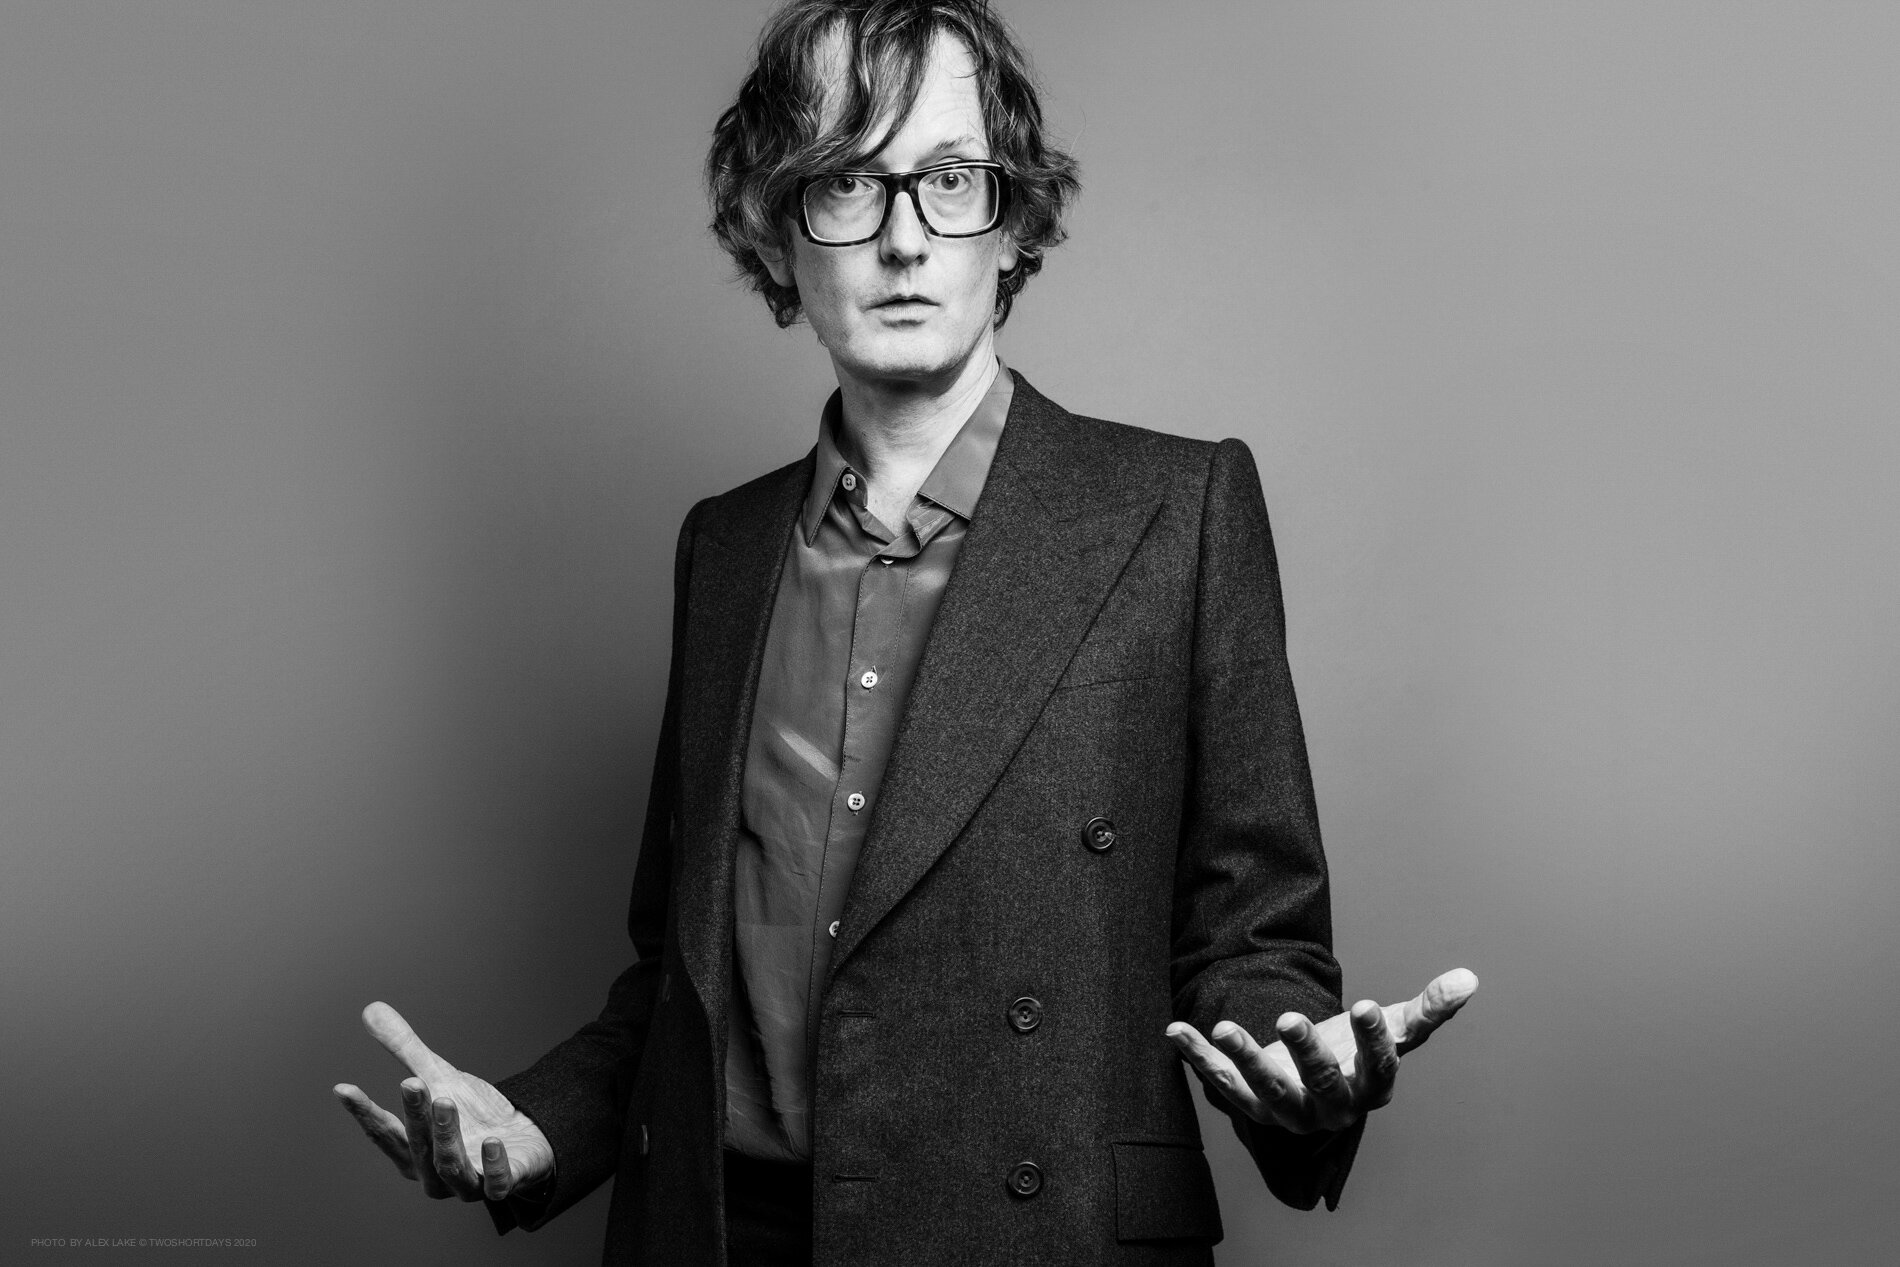 jarvis_cocker_photography_copyright_ALEX_LAKE_do_not_reproduce_without_permission_TWOSHORTDAYS.jpg